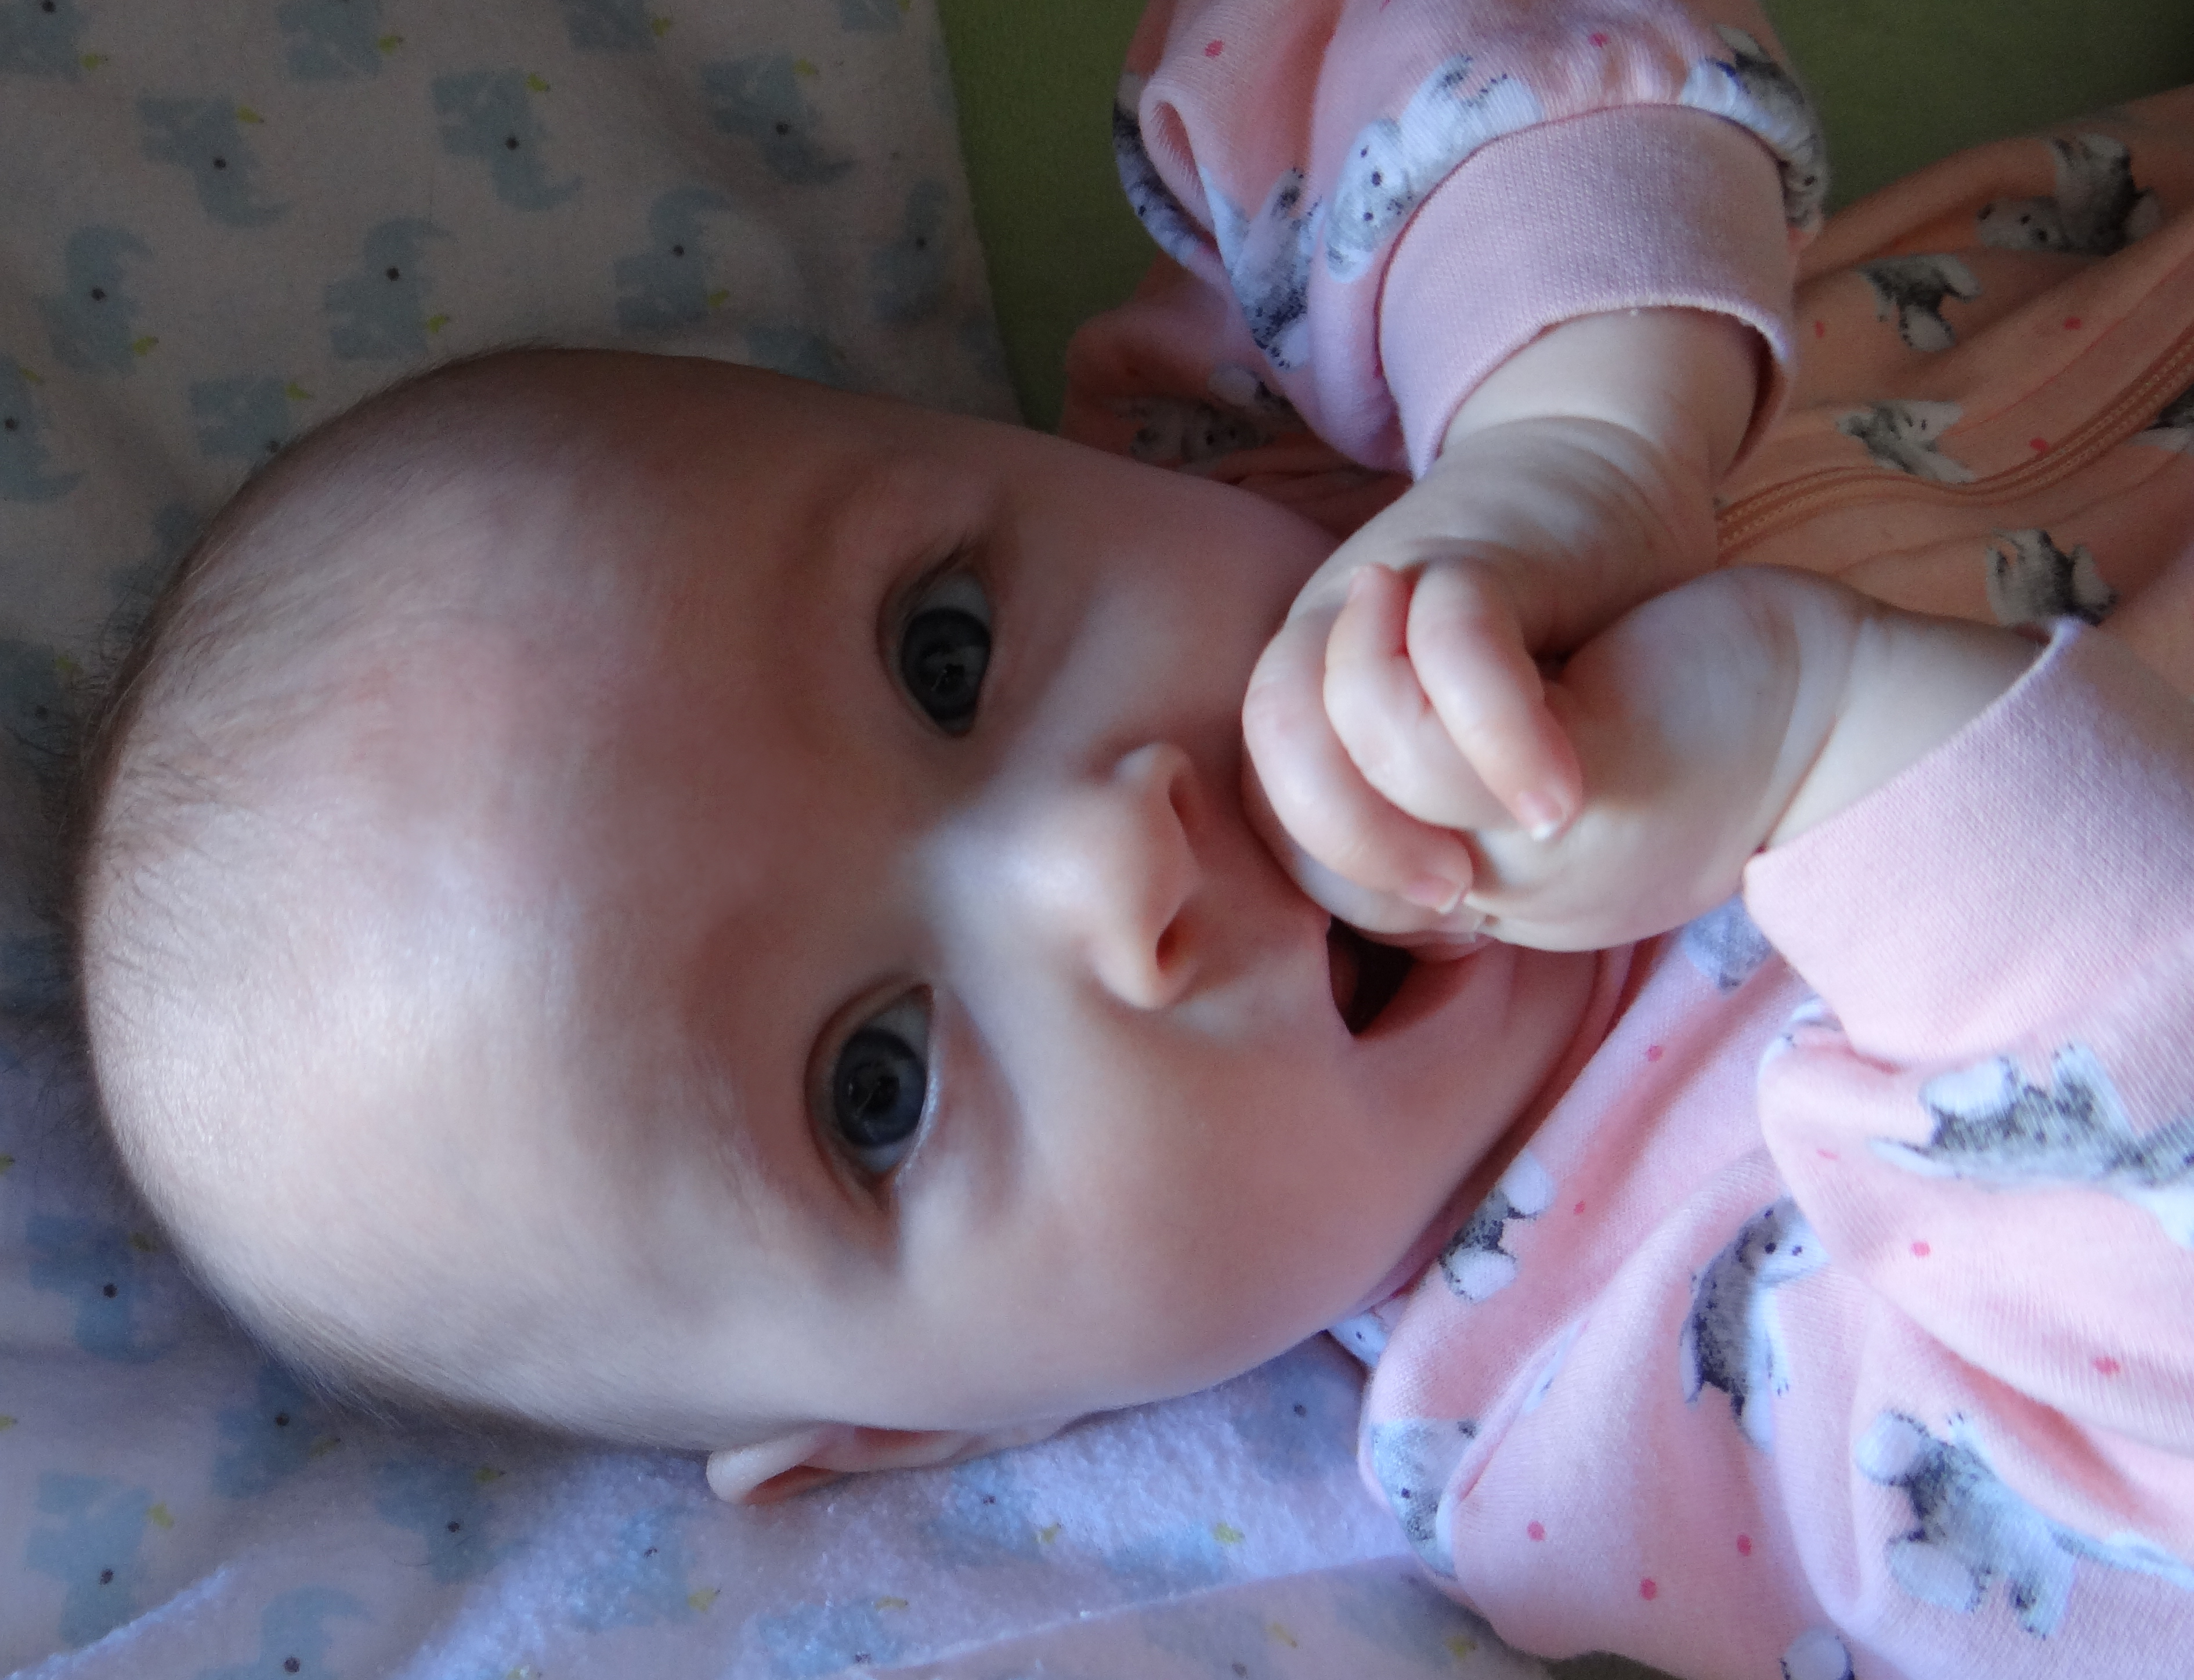 Infant with hands clasped together